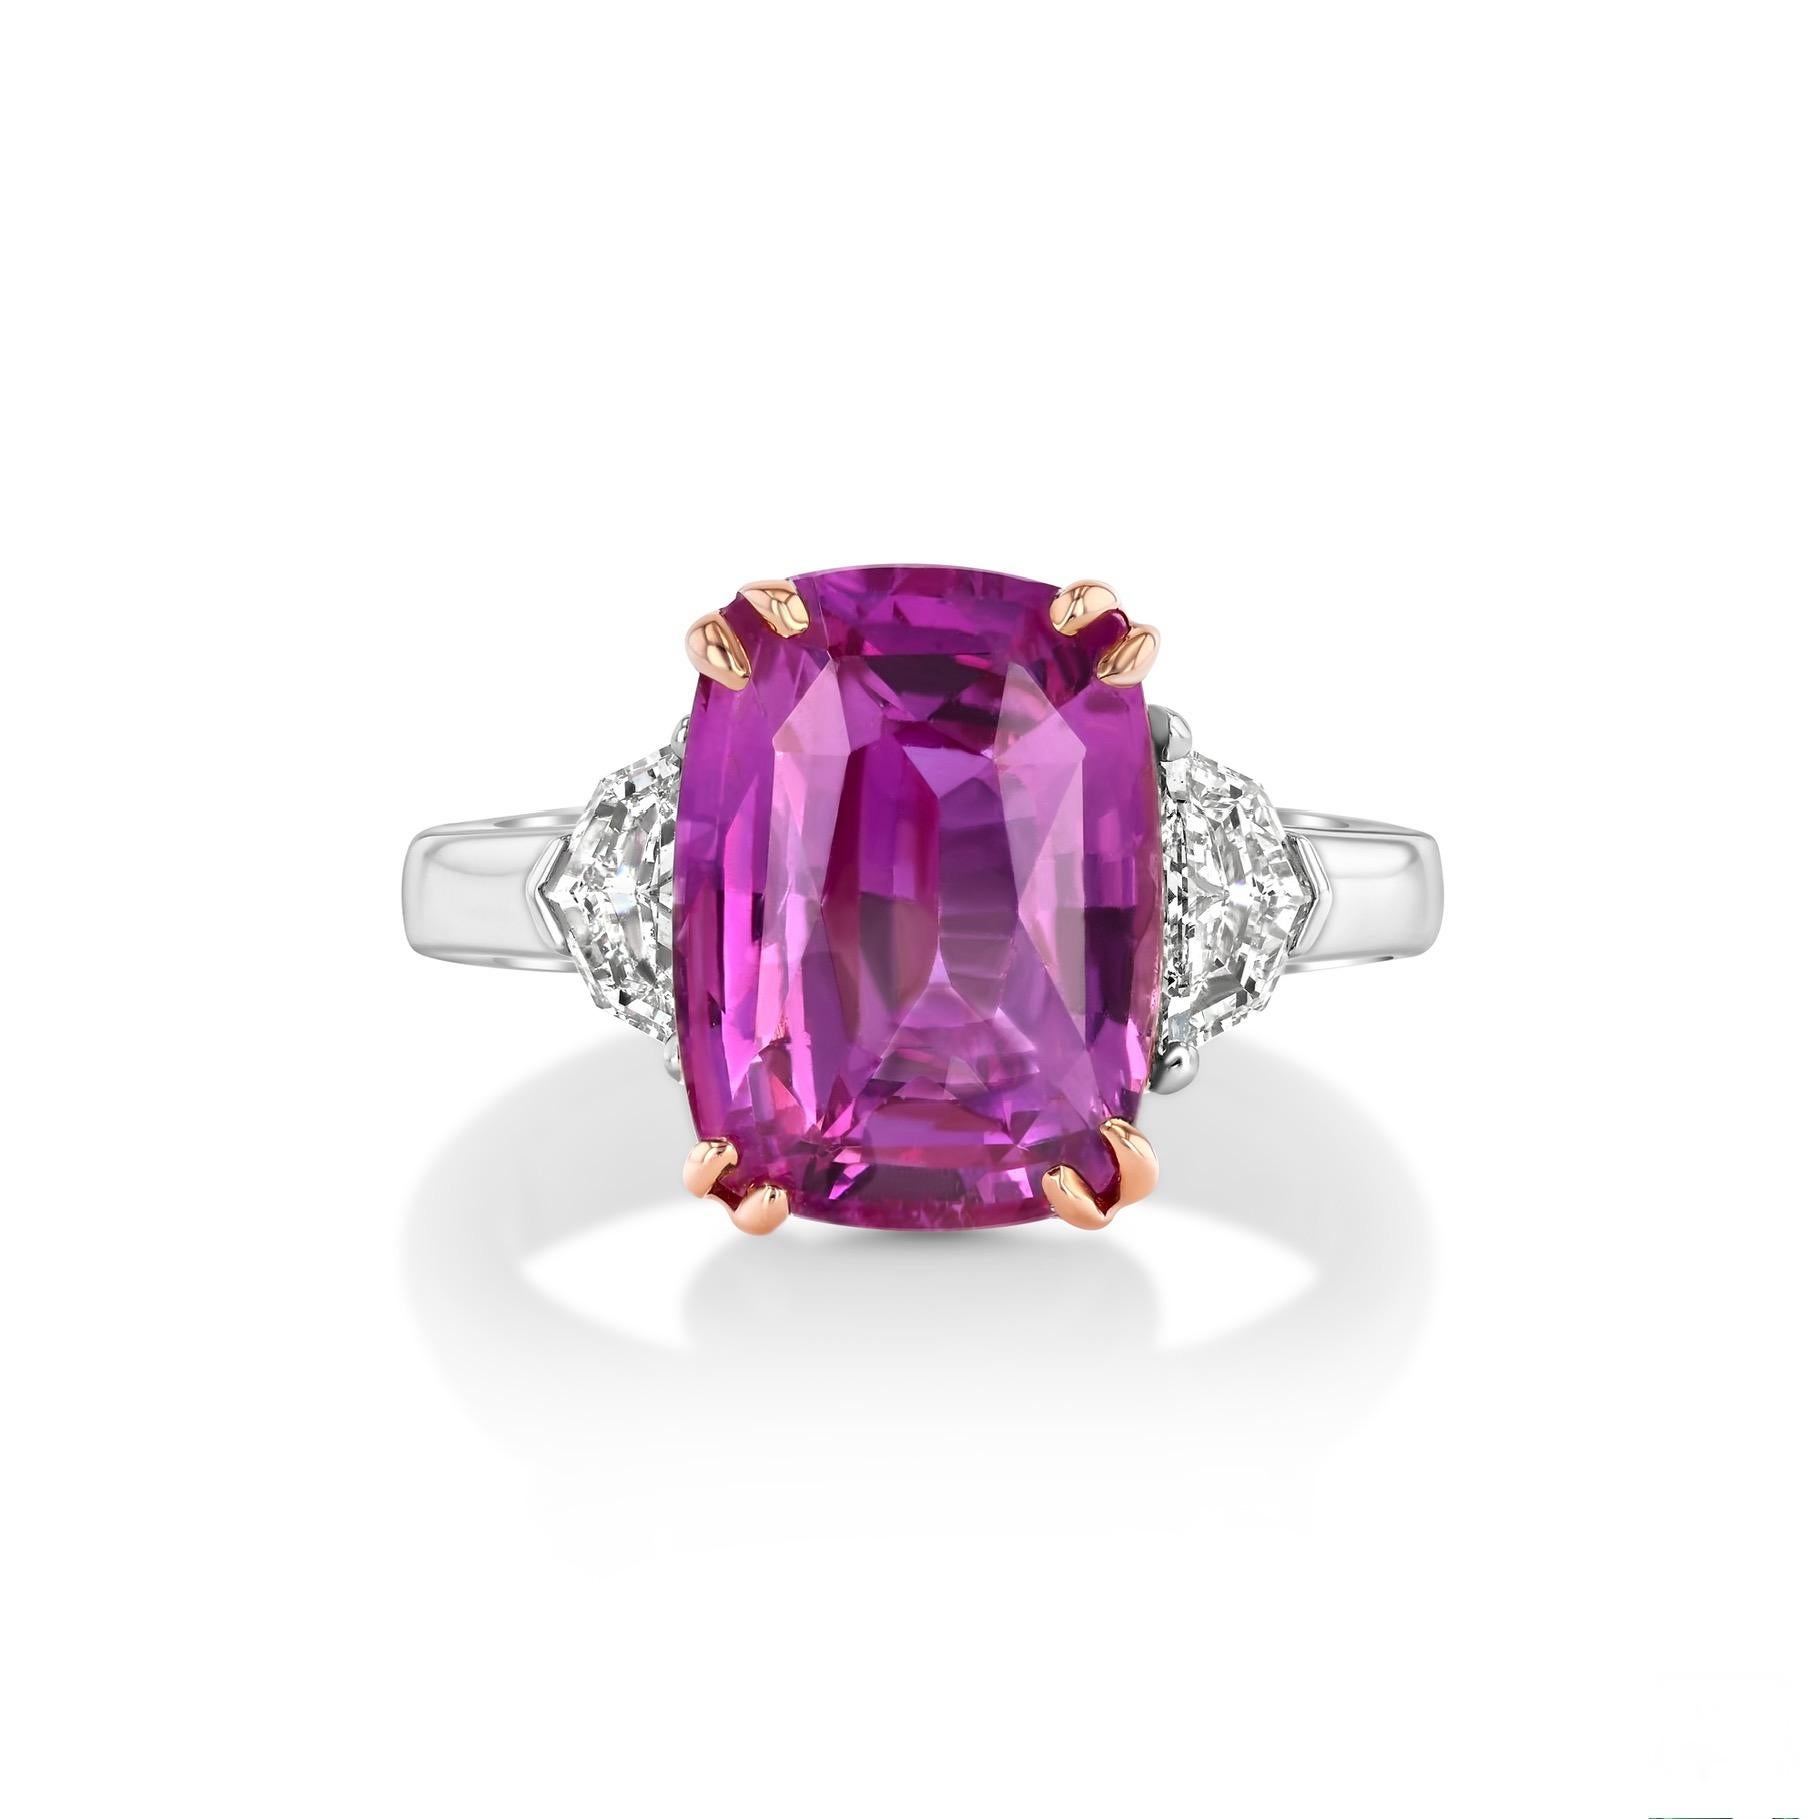 Modern 7.13-carat cushion Pink Sapphire ring. GIA certified. For Sale